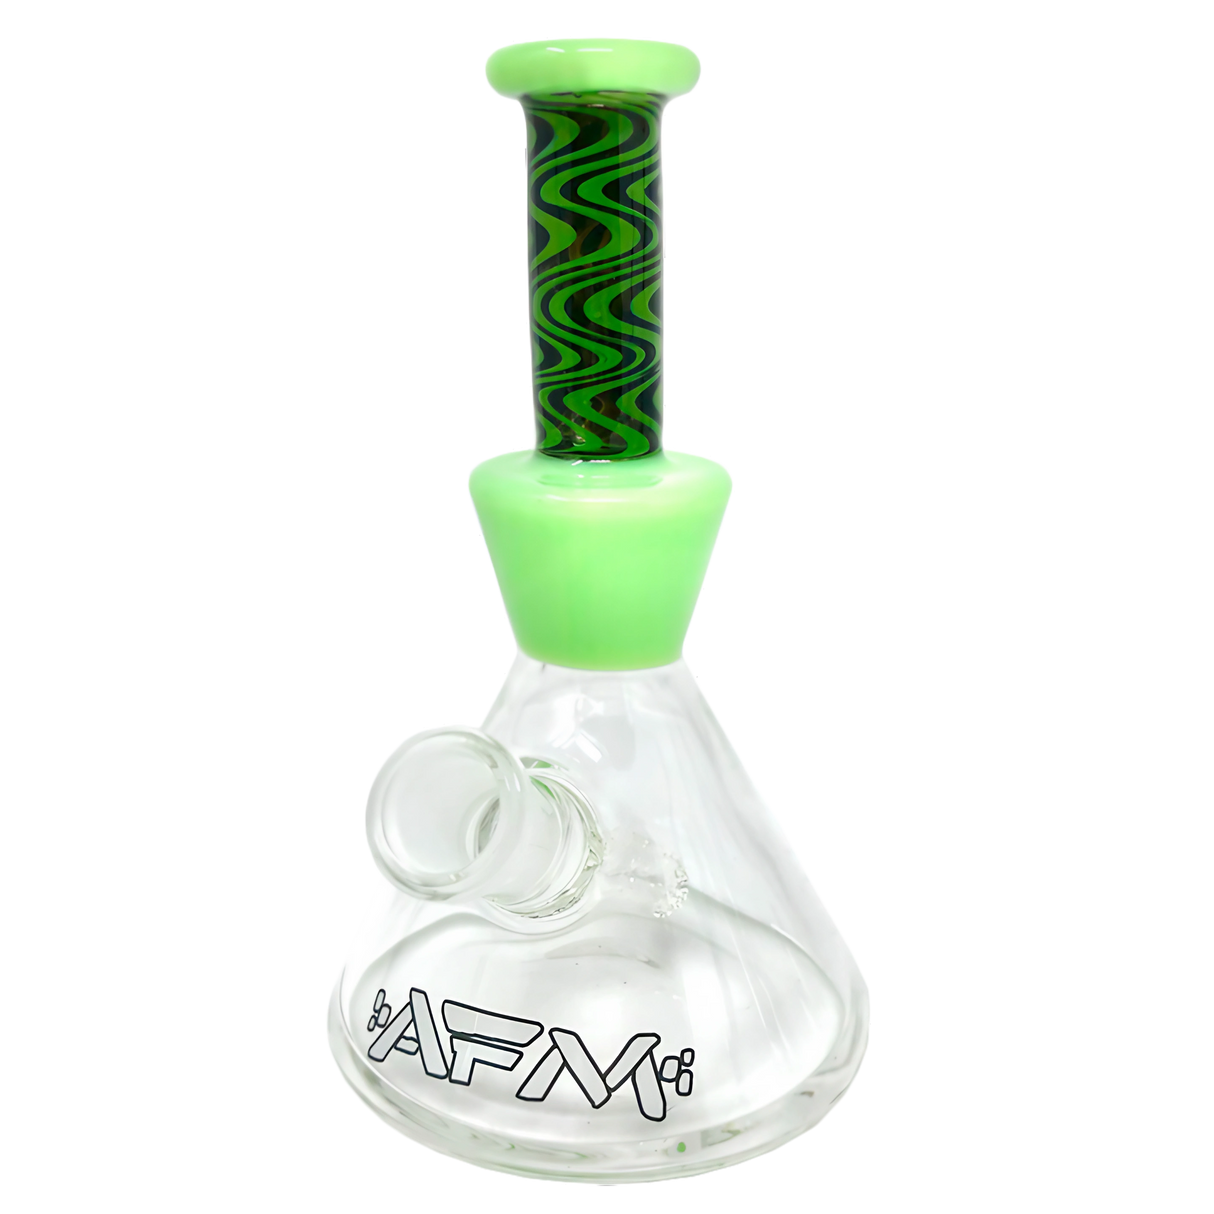 AFM Glass Trippy Mini Rig 6" Beaker Bong with 45 Degree Joint on Seamless White Background